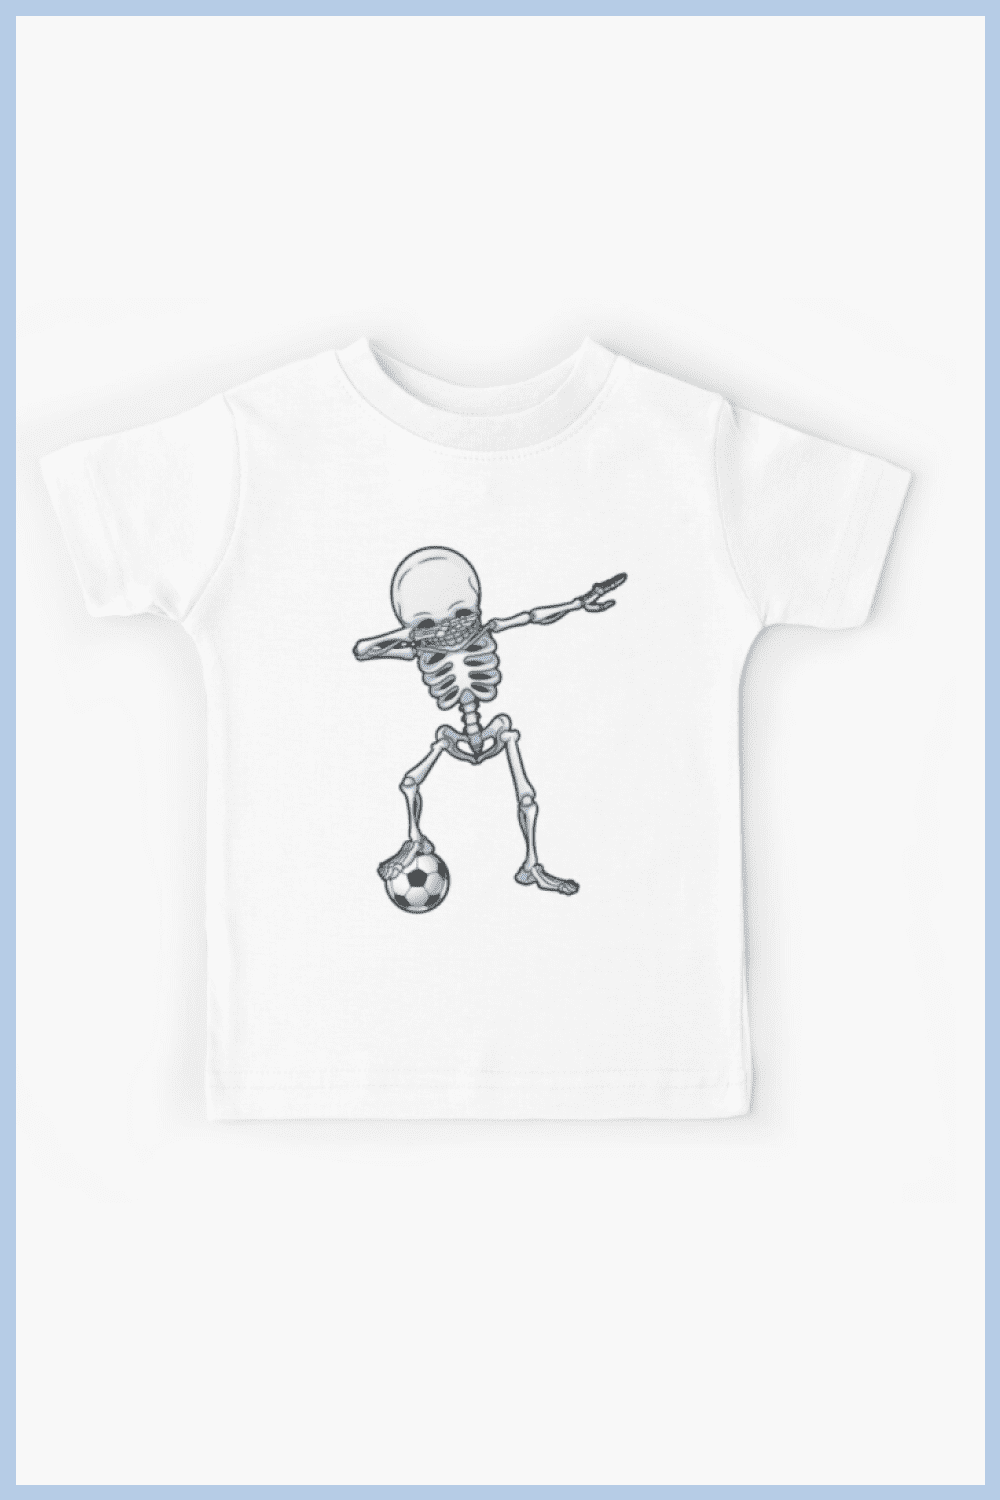 White T-shirt with gray skeletons dancing.